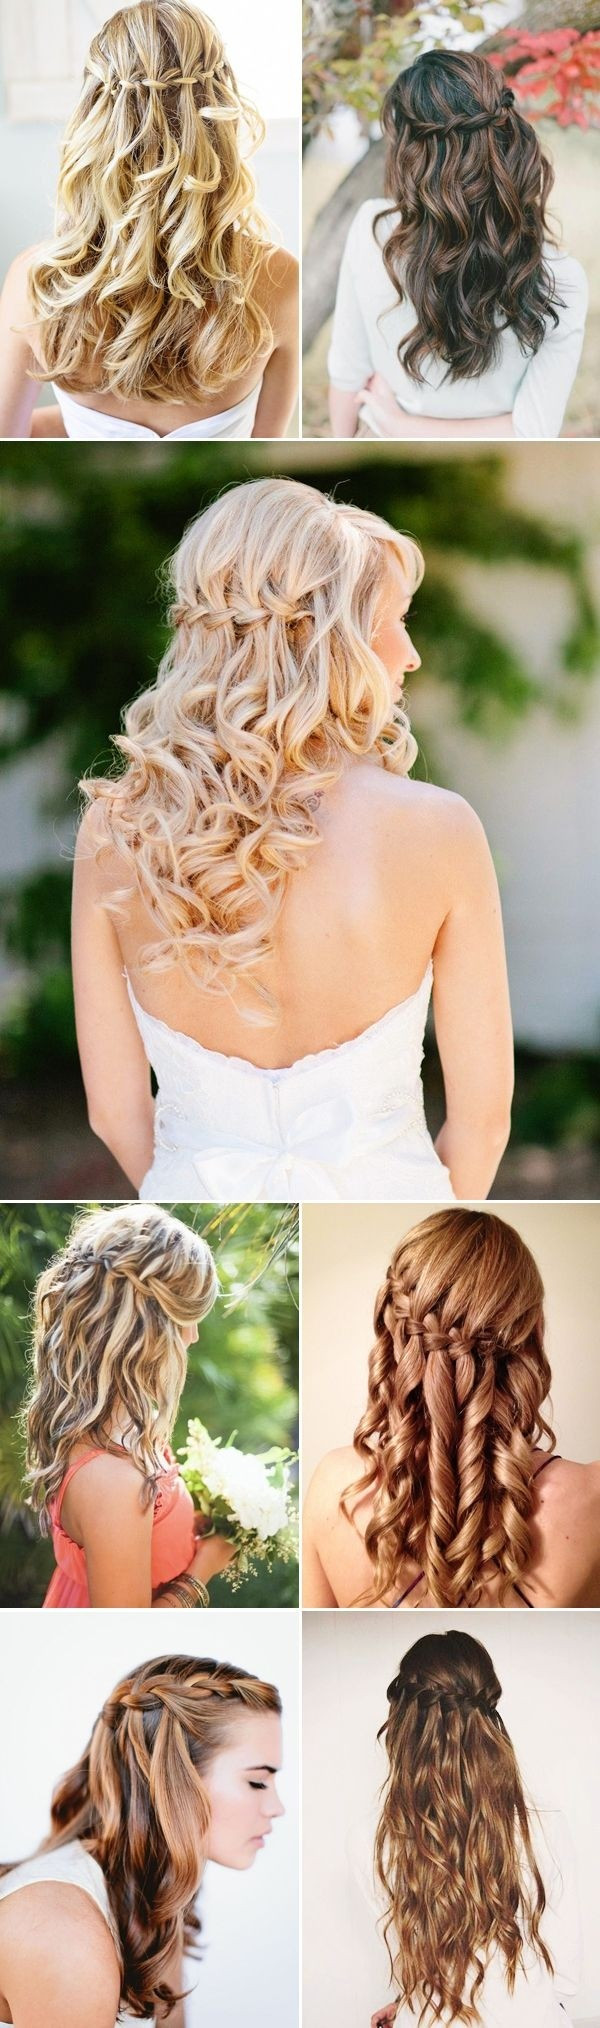 Hairstyles For Bridesmaids
 30 Hottest Bridesmaid Hairstyles For Long Hair PoPular